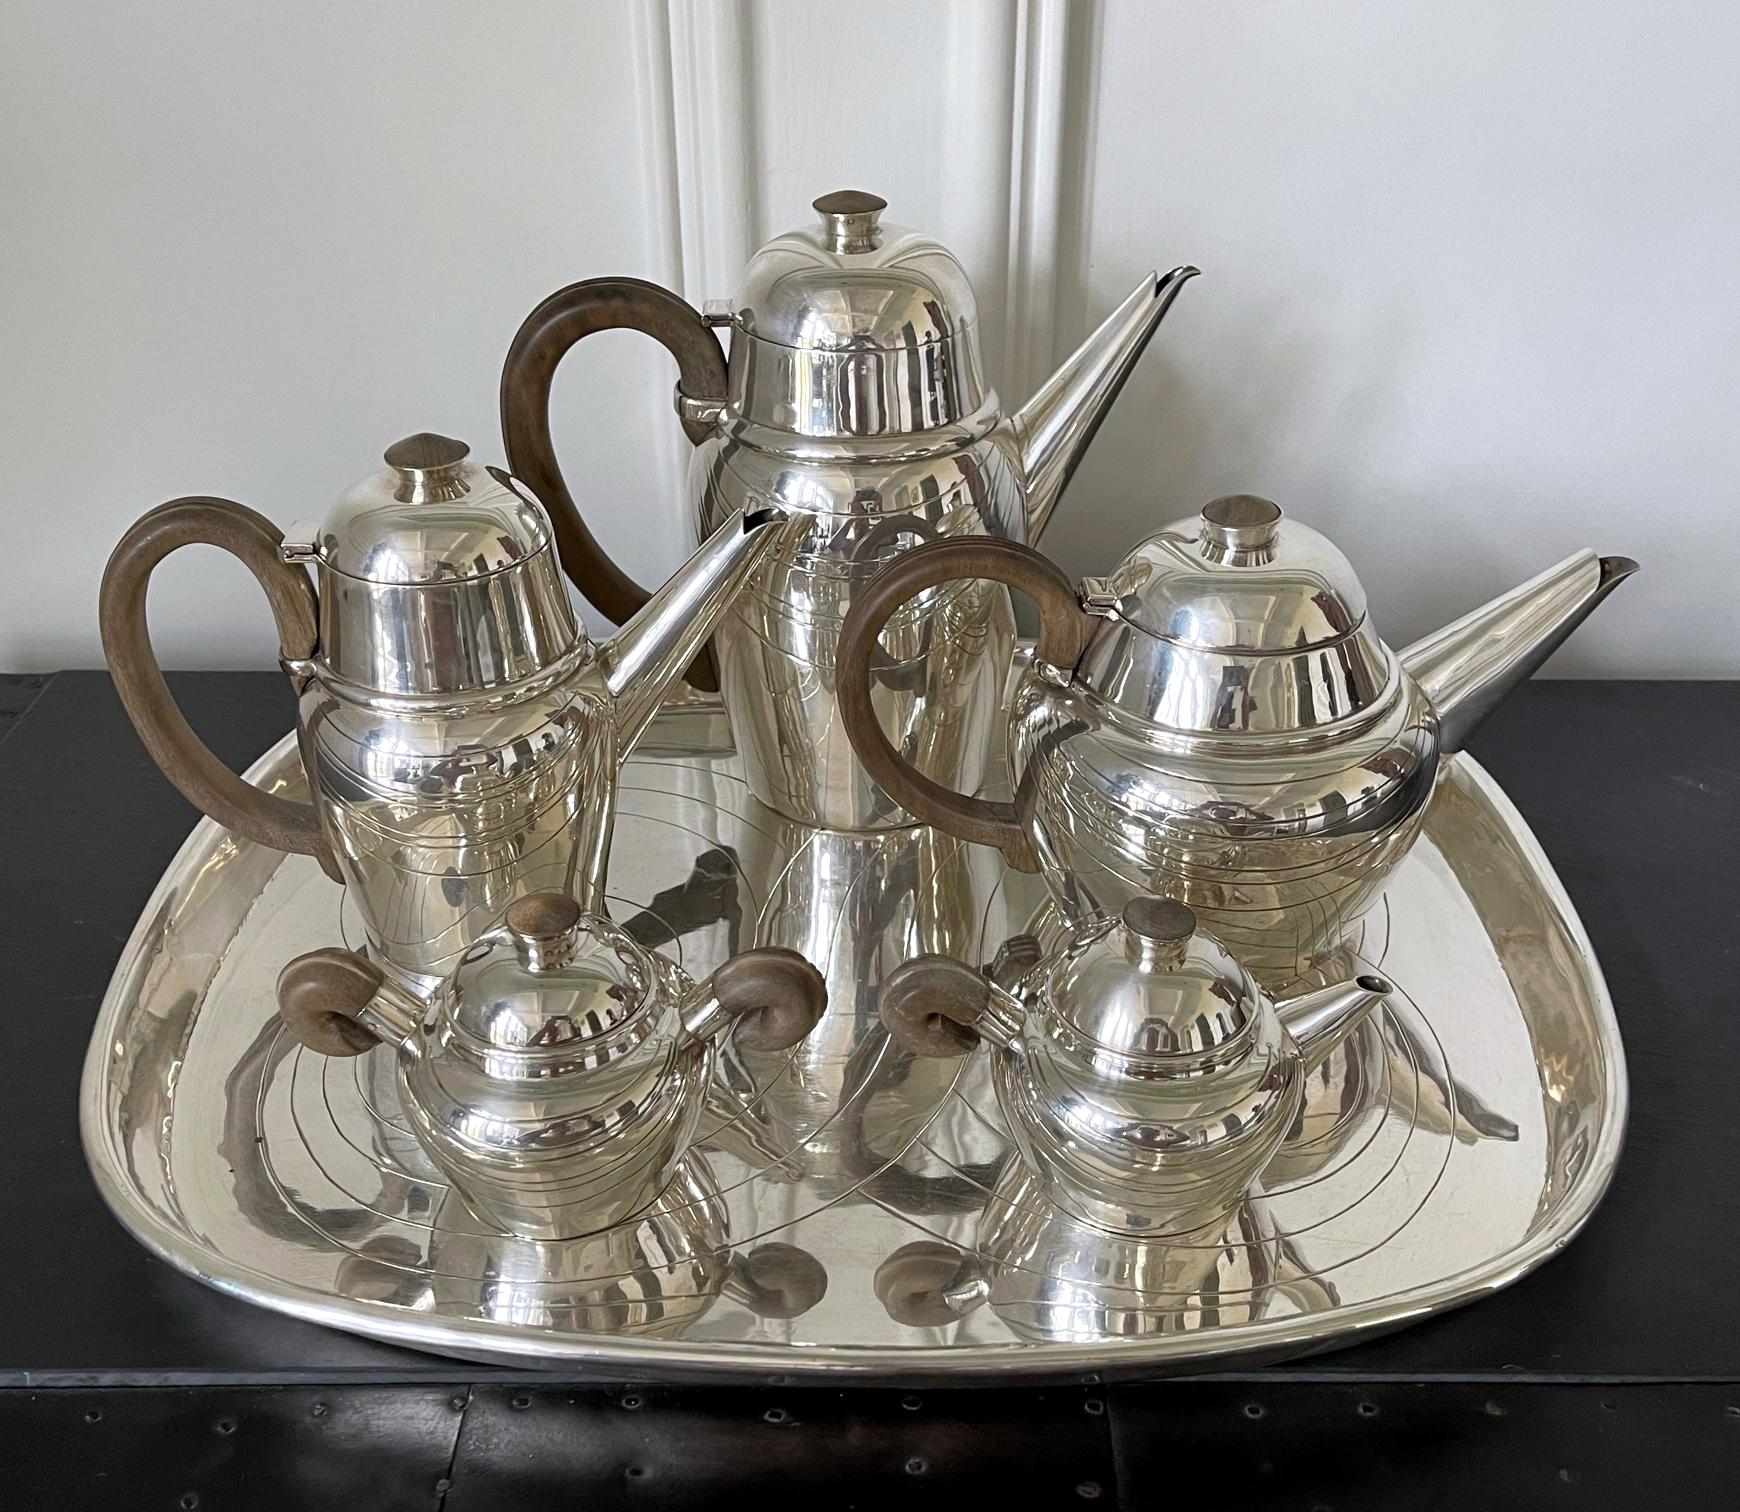 A large six-piece sterling silver service for coffee and tea that consists of a gallery tray, a coffee pot, a tea pot, a hot milk or chocolate pot, a sugar and a milk jar. This stunning modernist set was designed and made by William Spratling circa